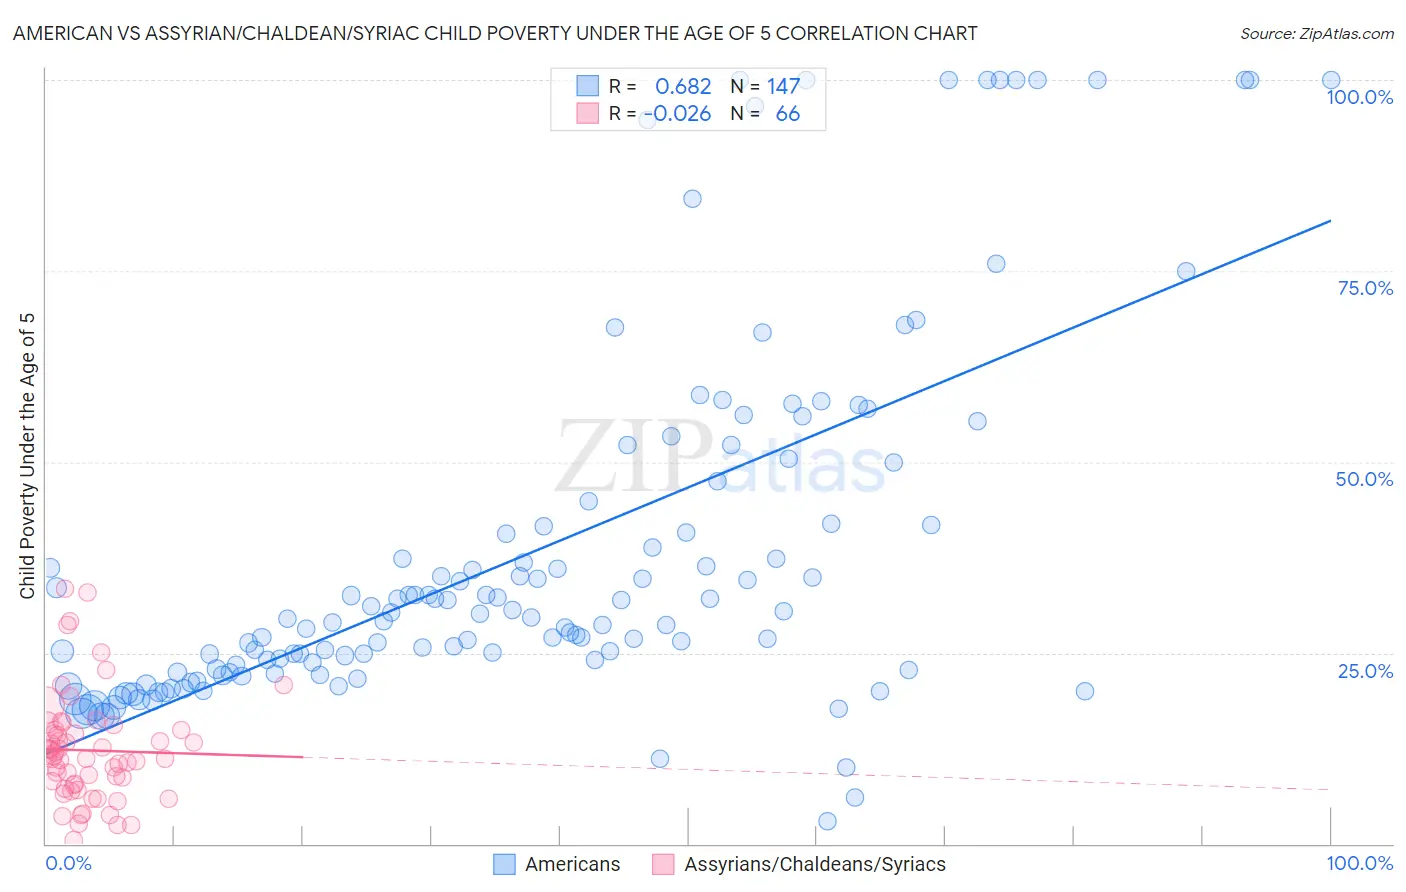 American vs Assyrian/Chaldean/Syriac Child Poverty Under the Age of 5